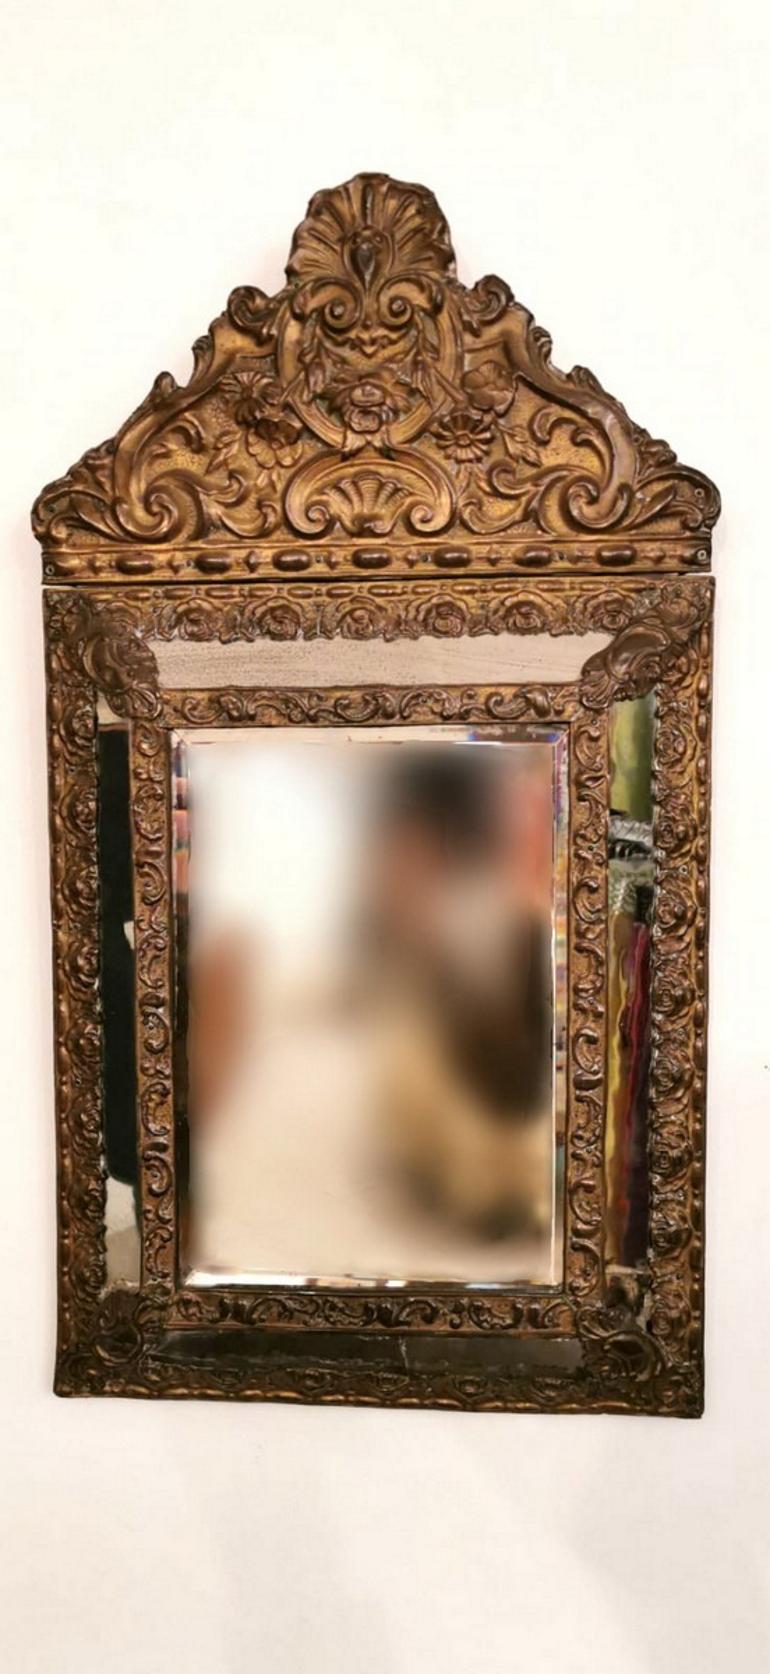 We kindly suggest you read the whole description, because with it we try to give you detailed technical and historical information to guarantee the authenticity of our objects.
Elegant Napoleonic period frame with a central mirror, four mirrors on